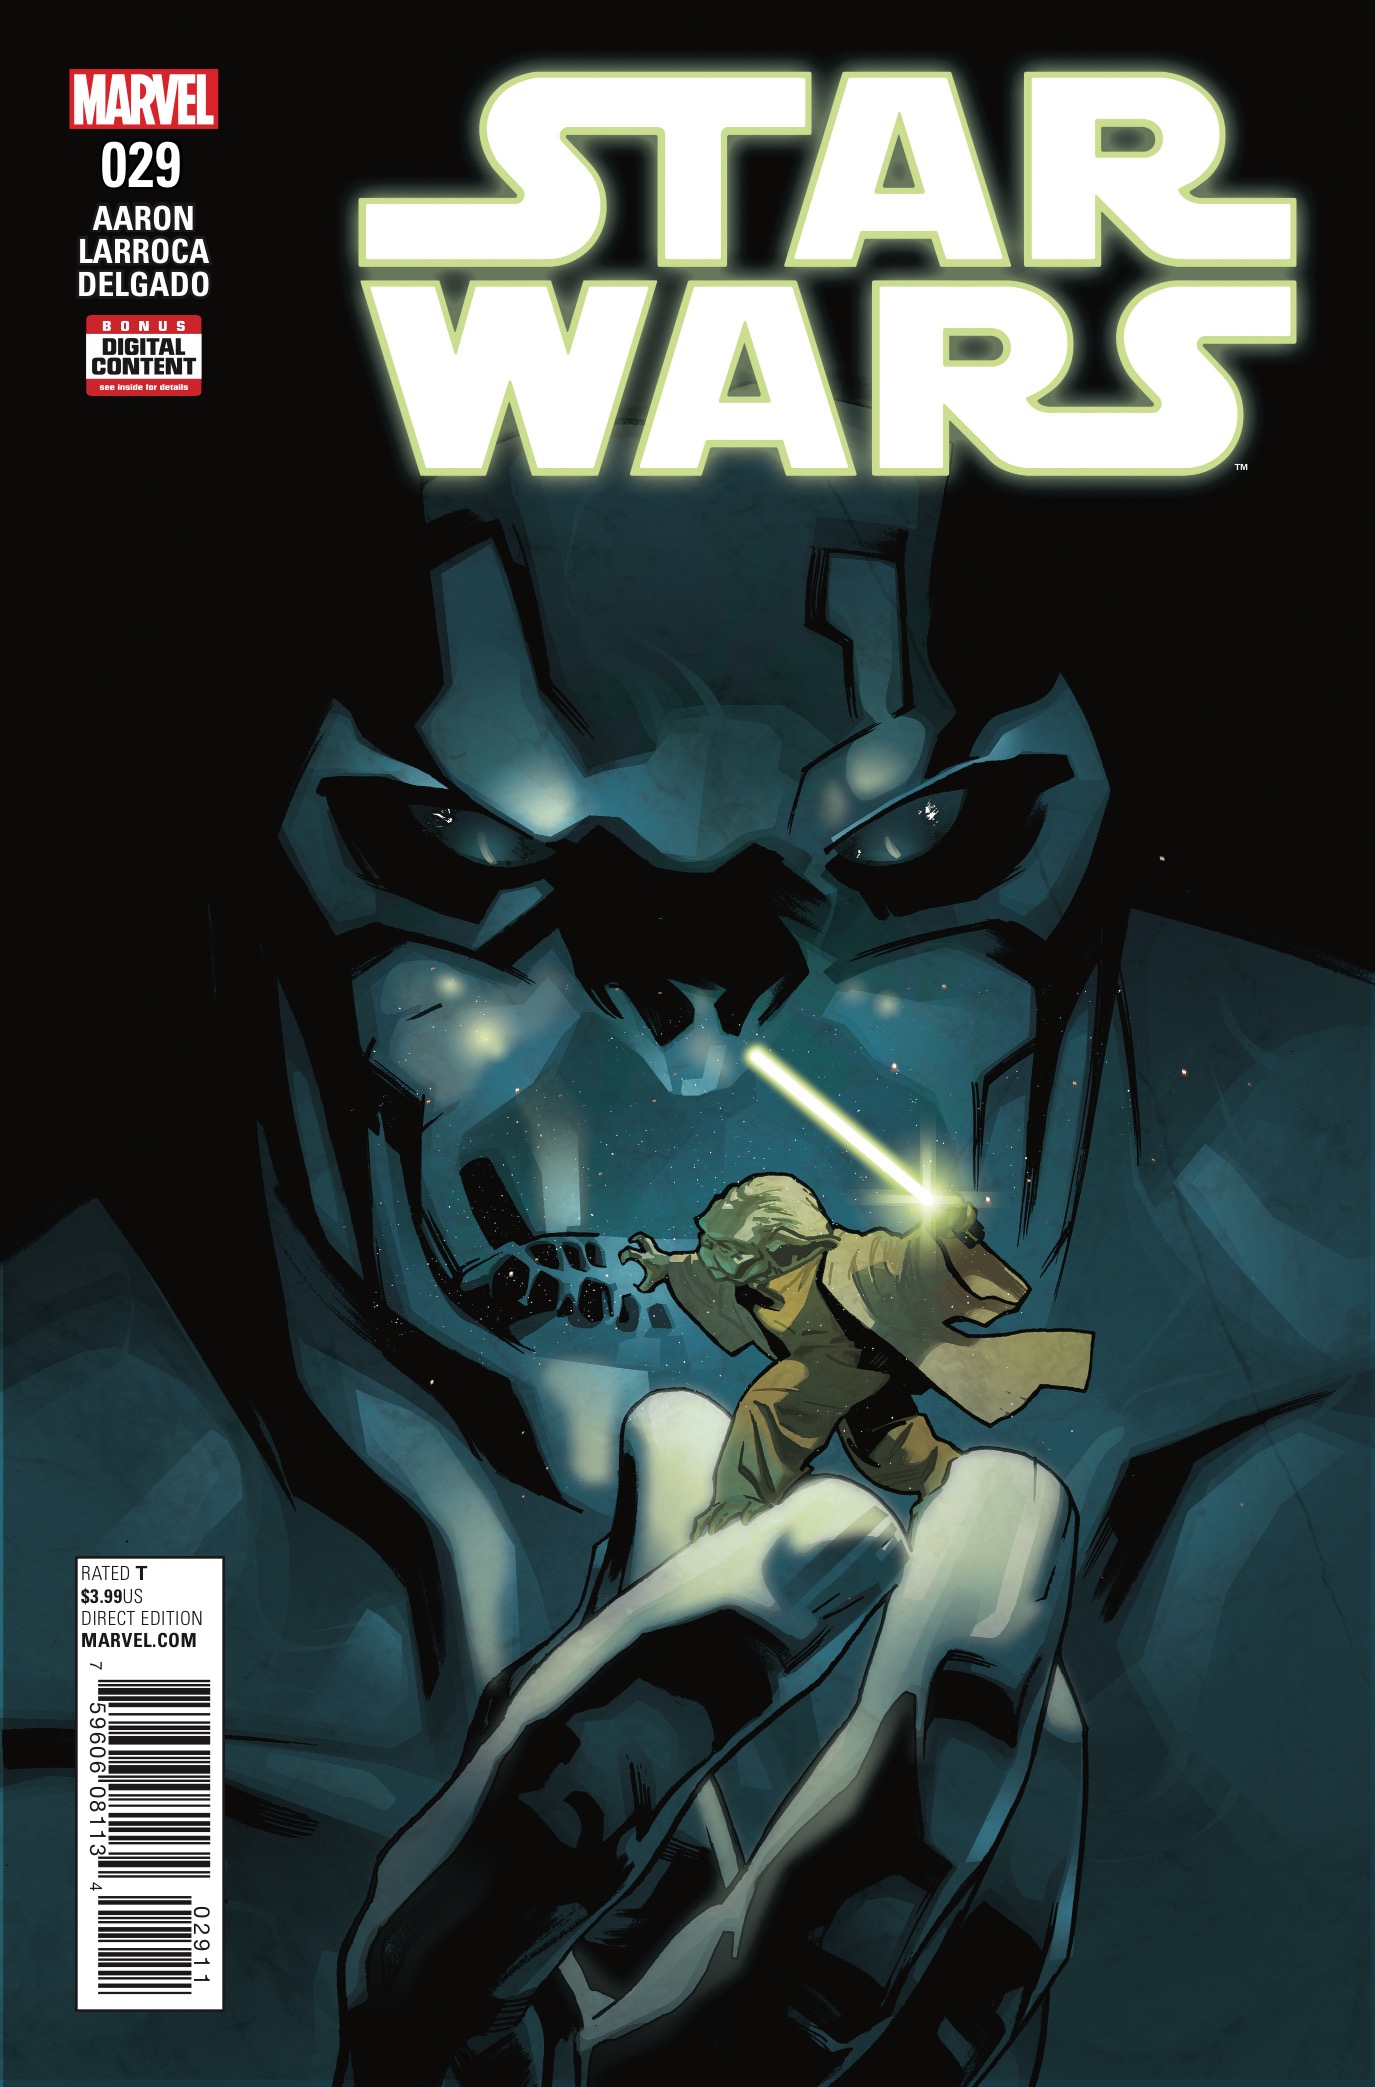 Star Wars #29 Review